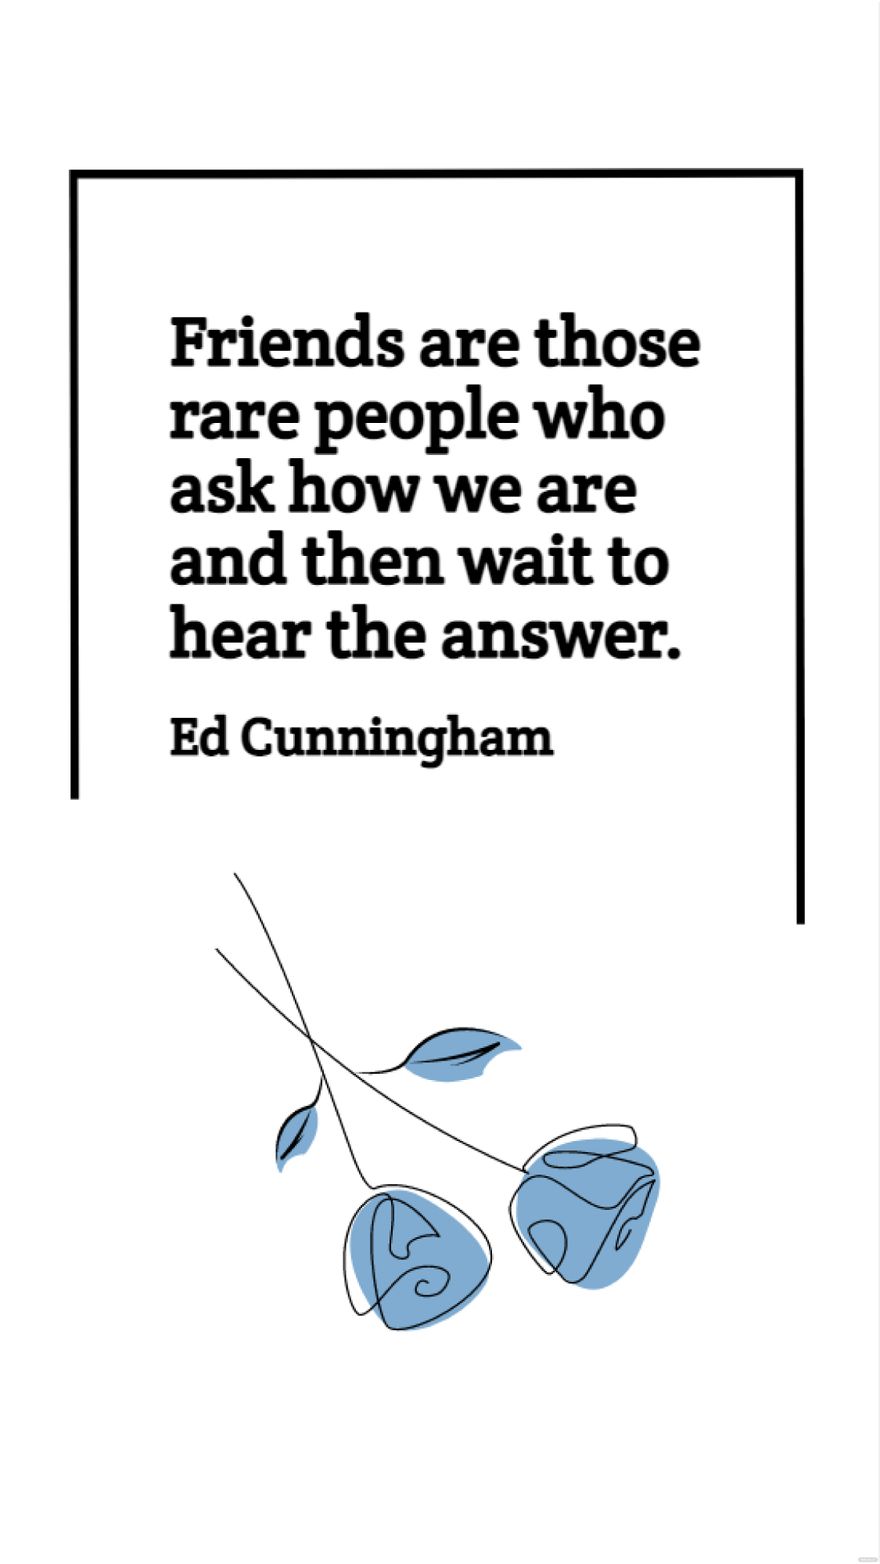 Ed Cunningham - Friends are those rare people who ask how we are and then wait to hear the answer.